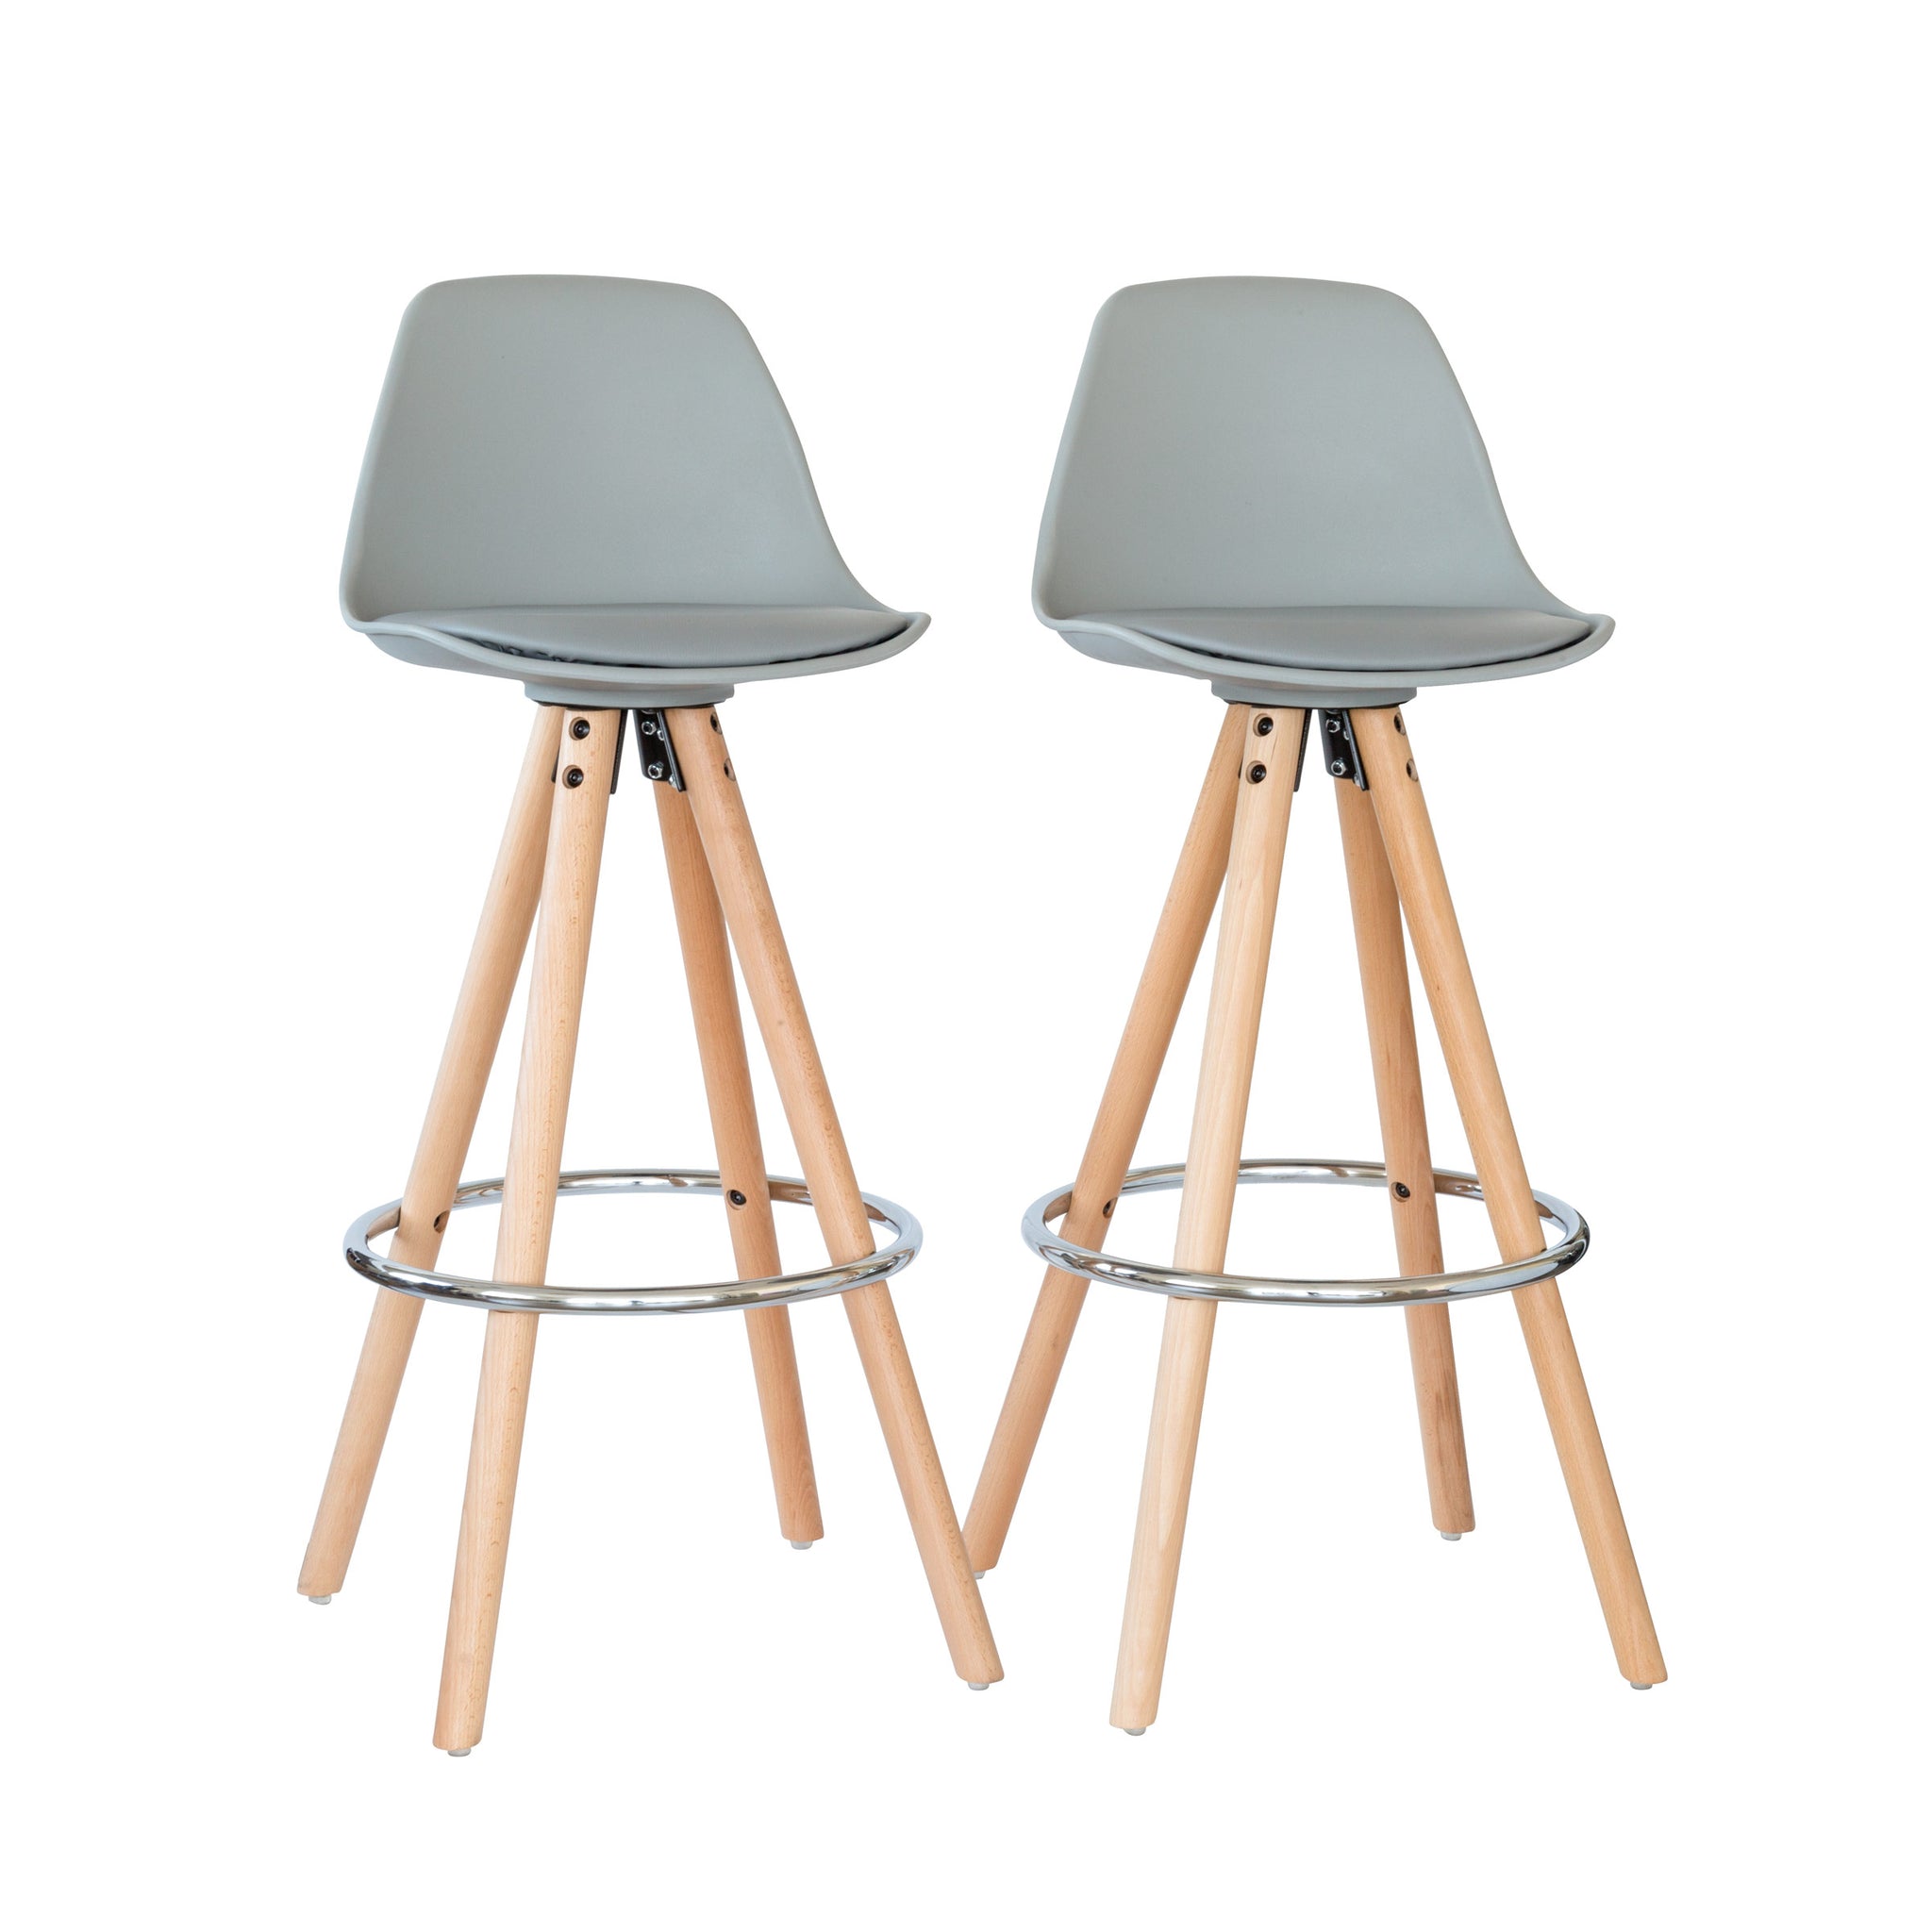 2 PU Leather Padded Barstools (Light Grey/Wood) with Metal Footrest